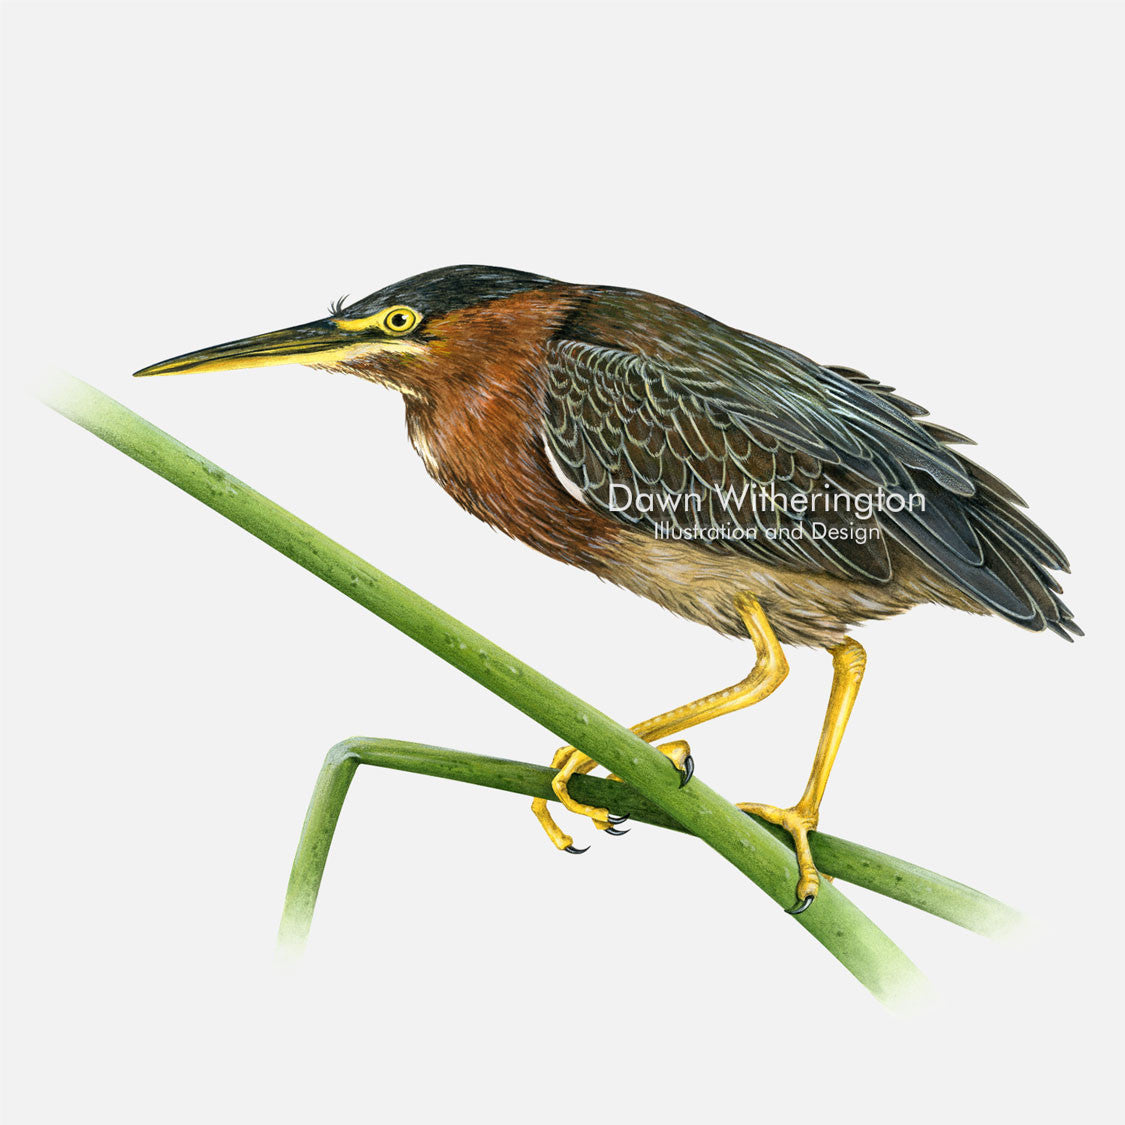 This beautiful illustration of a green heron, Butorides virescens, is biologically accurate in detail.